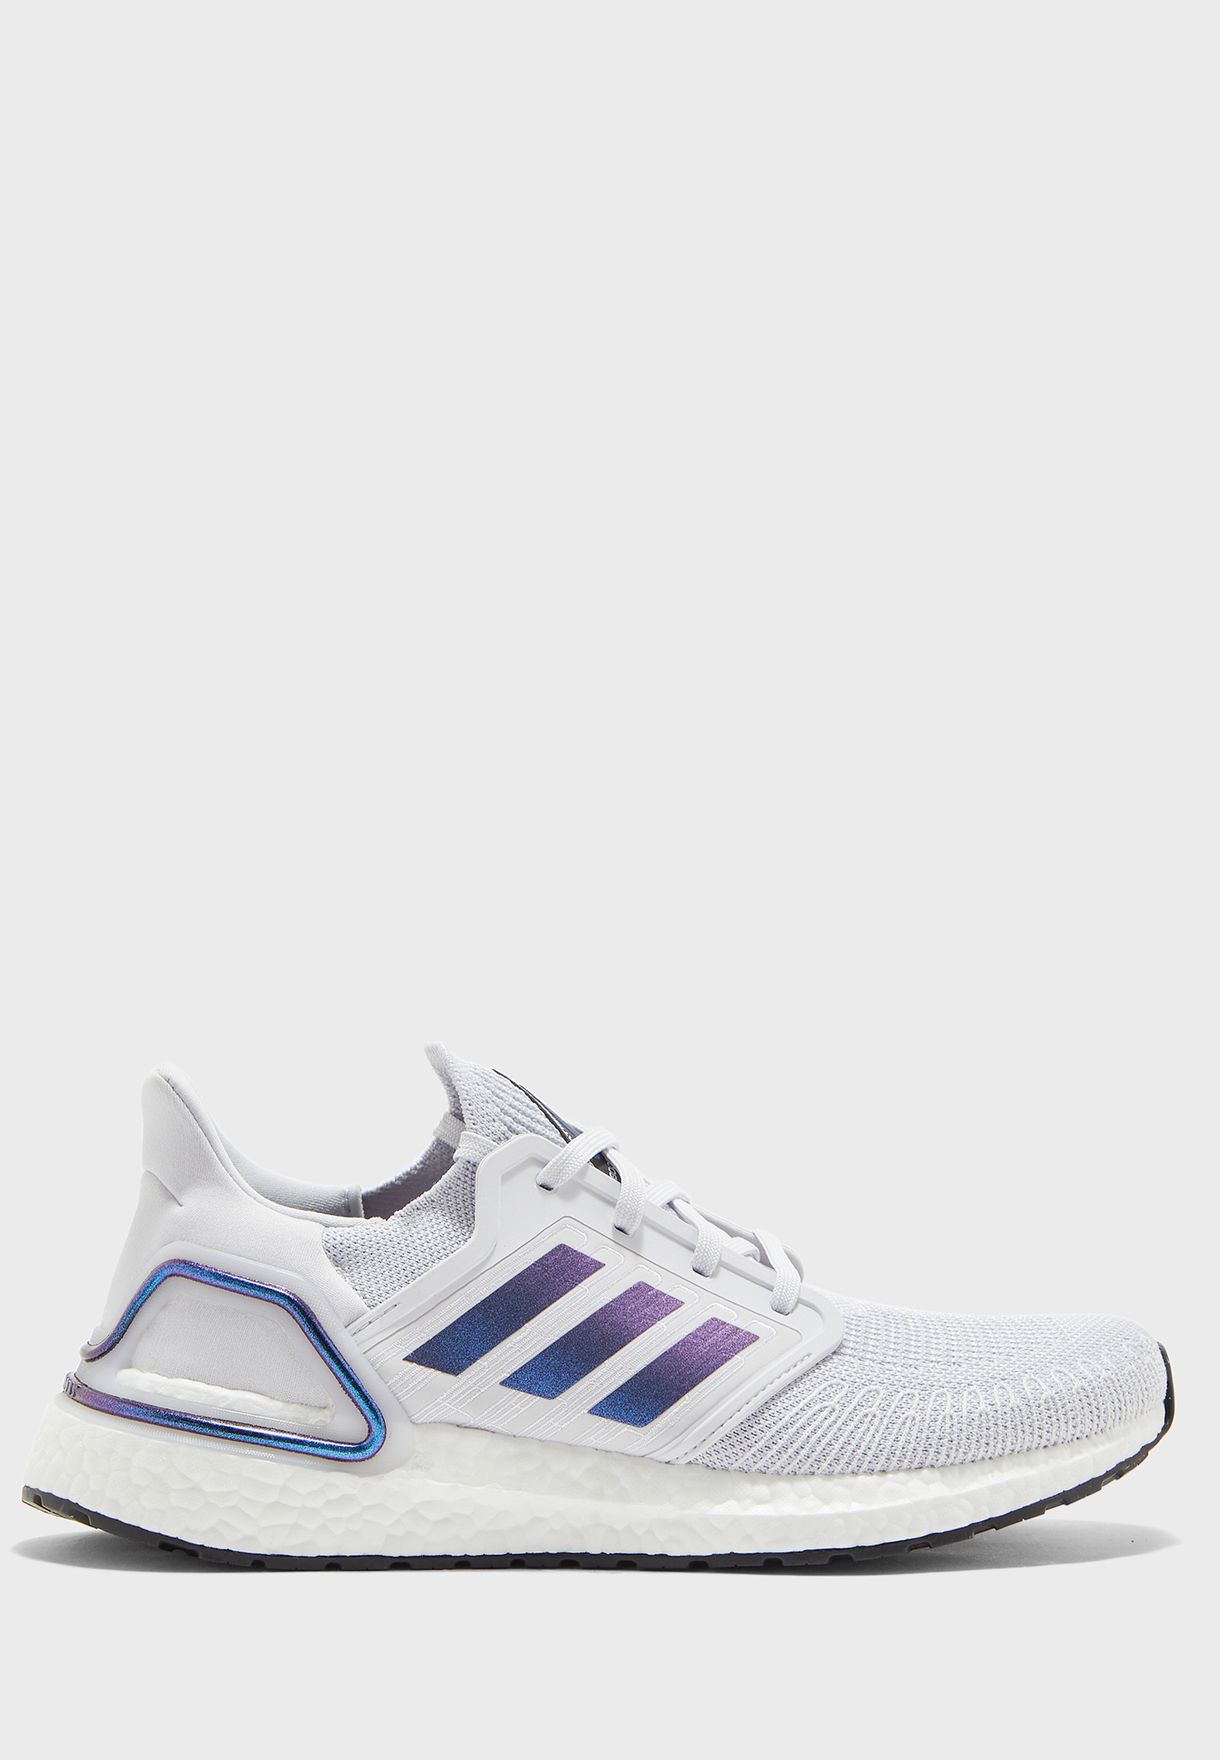 adidas space race shoes